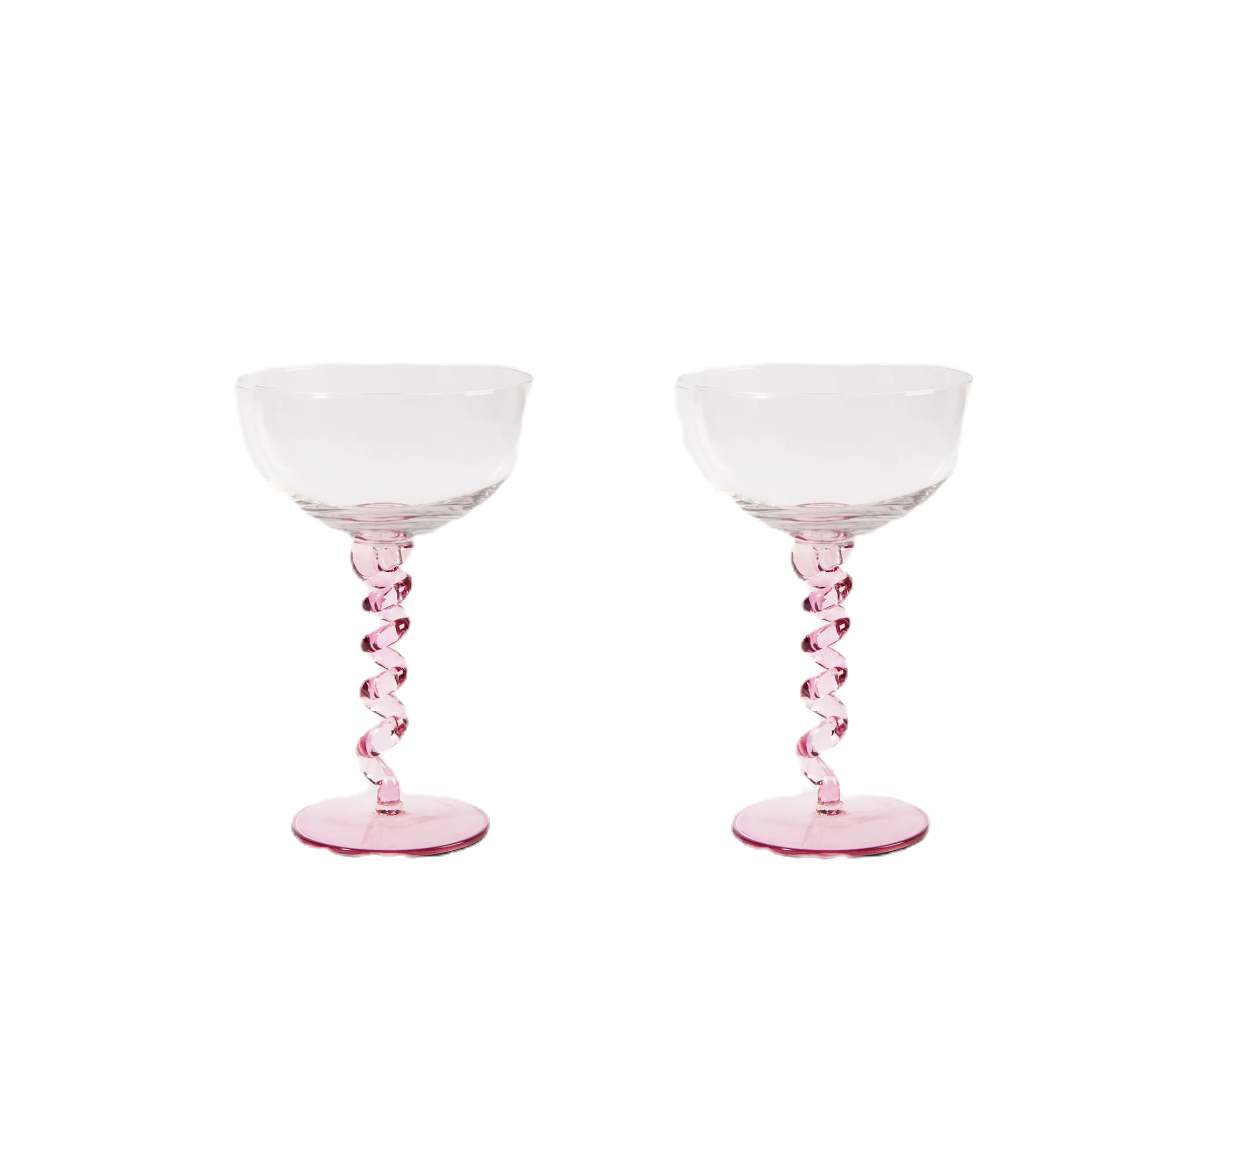 Champagne spiral coupe pair in pink